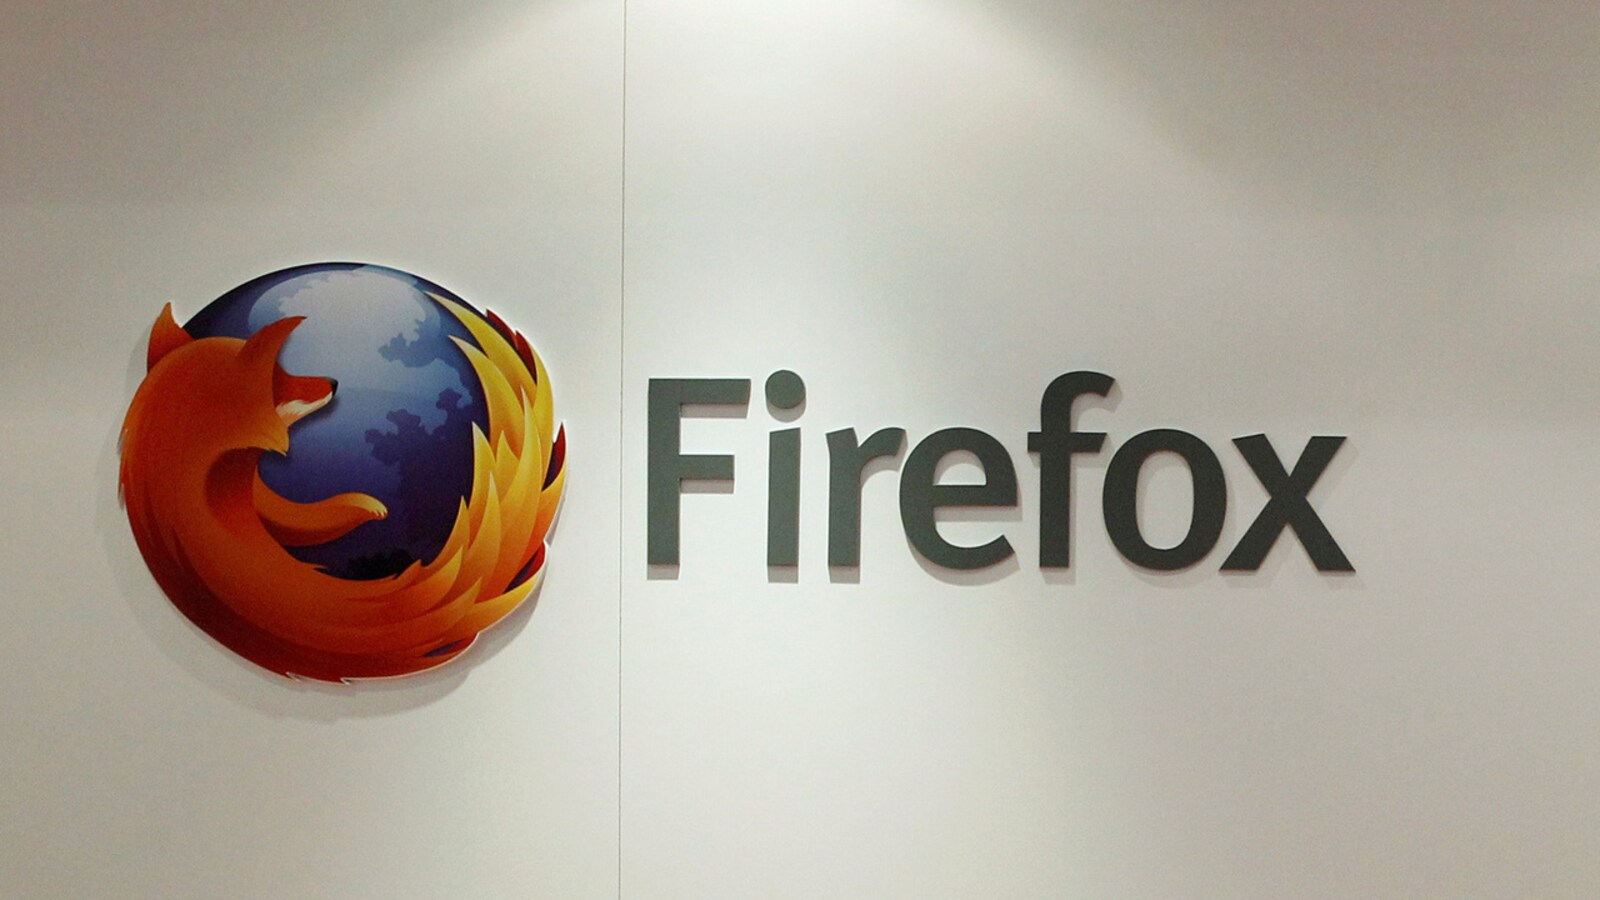 How to Enable Cryptocurrency Mining Protection in Mozilla Firefox